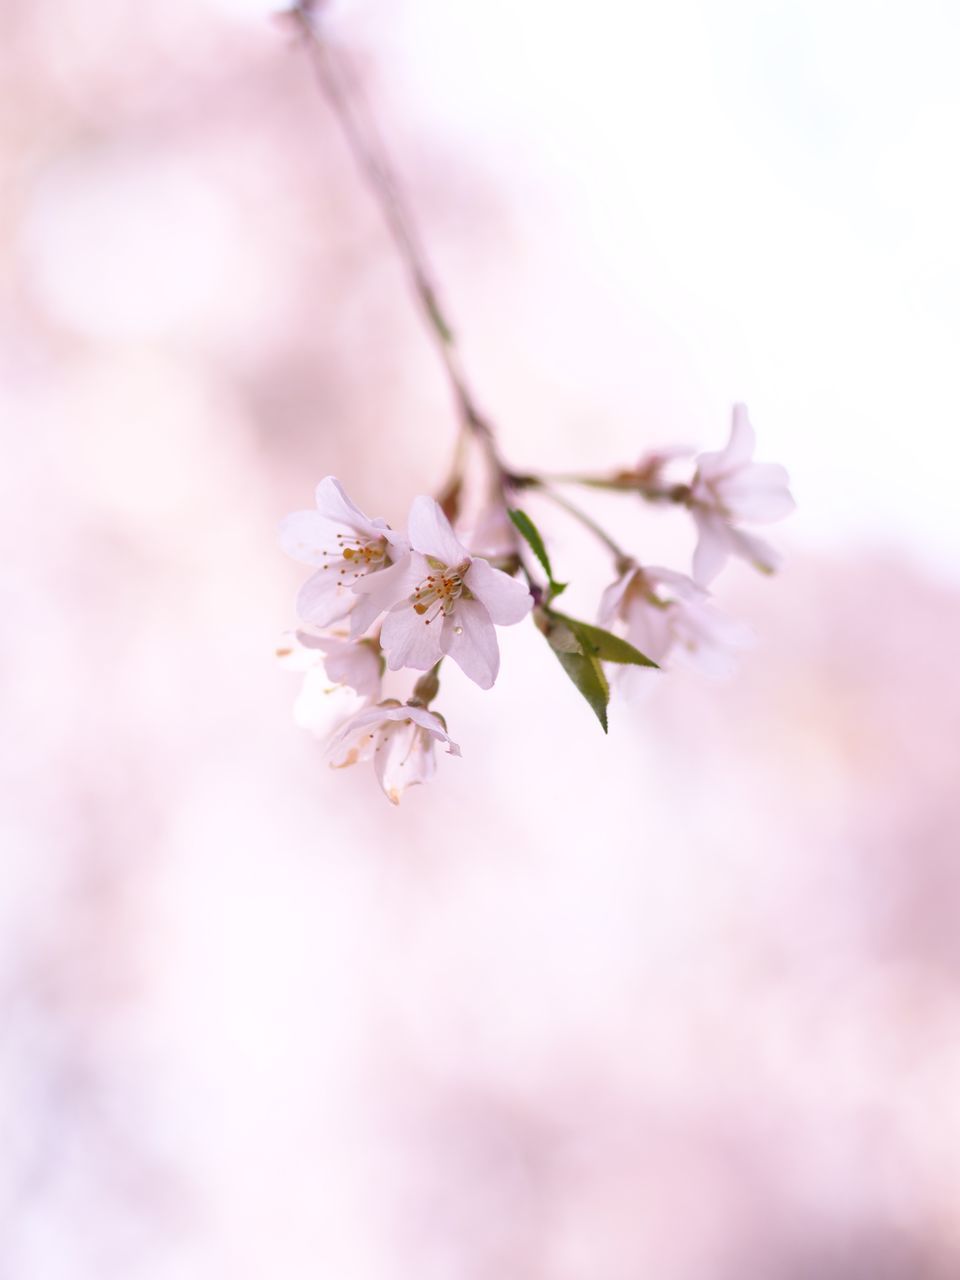 flower, blossom, pink color, fragility, nature, beauty in nature, growth, springtime, apple blossom, tree, botany, no people, selective focus, freshness, branch, petal, close-up, pink, day, outdoors, flower head